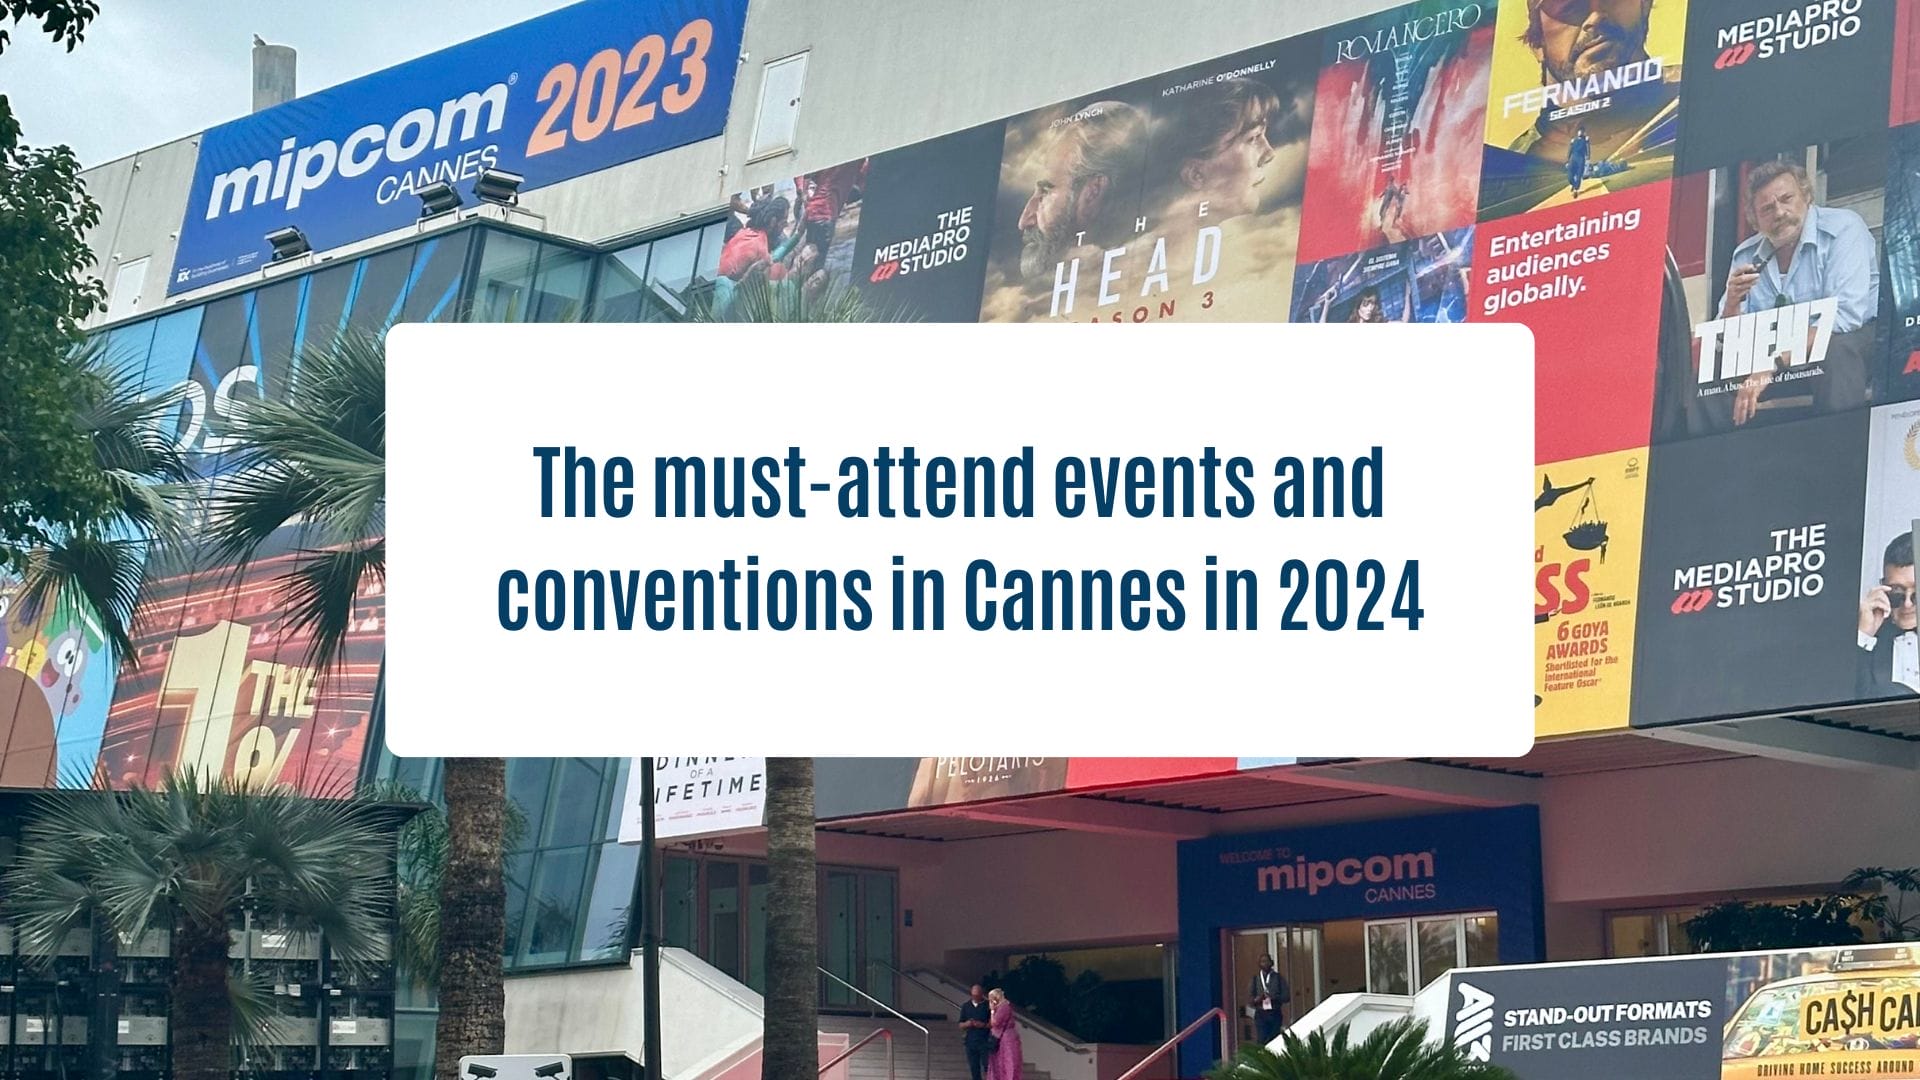 Actualités Olam Properties Cannes - The must-see events and conventions in Cannes in 2024